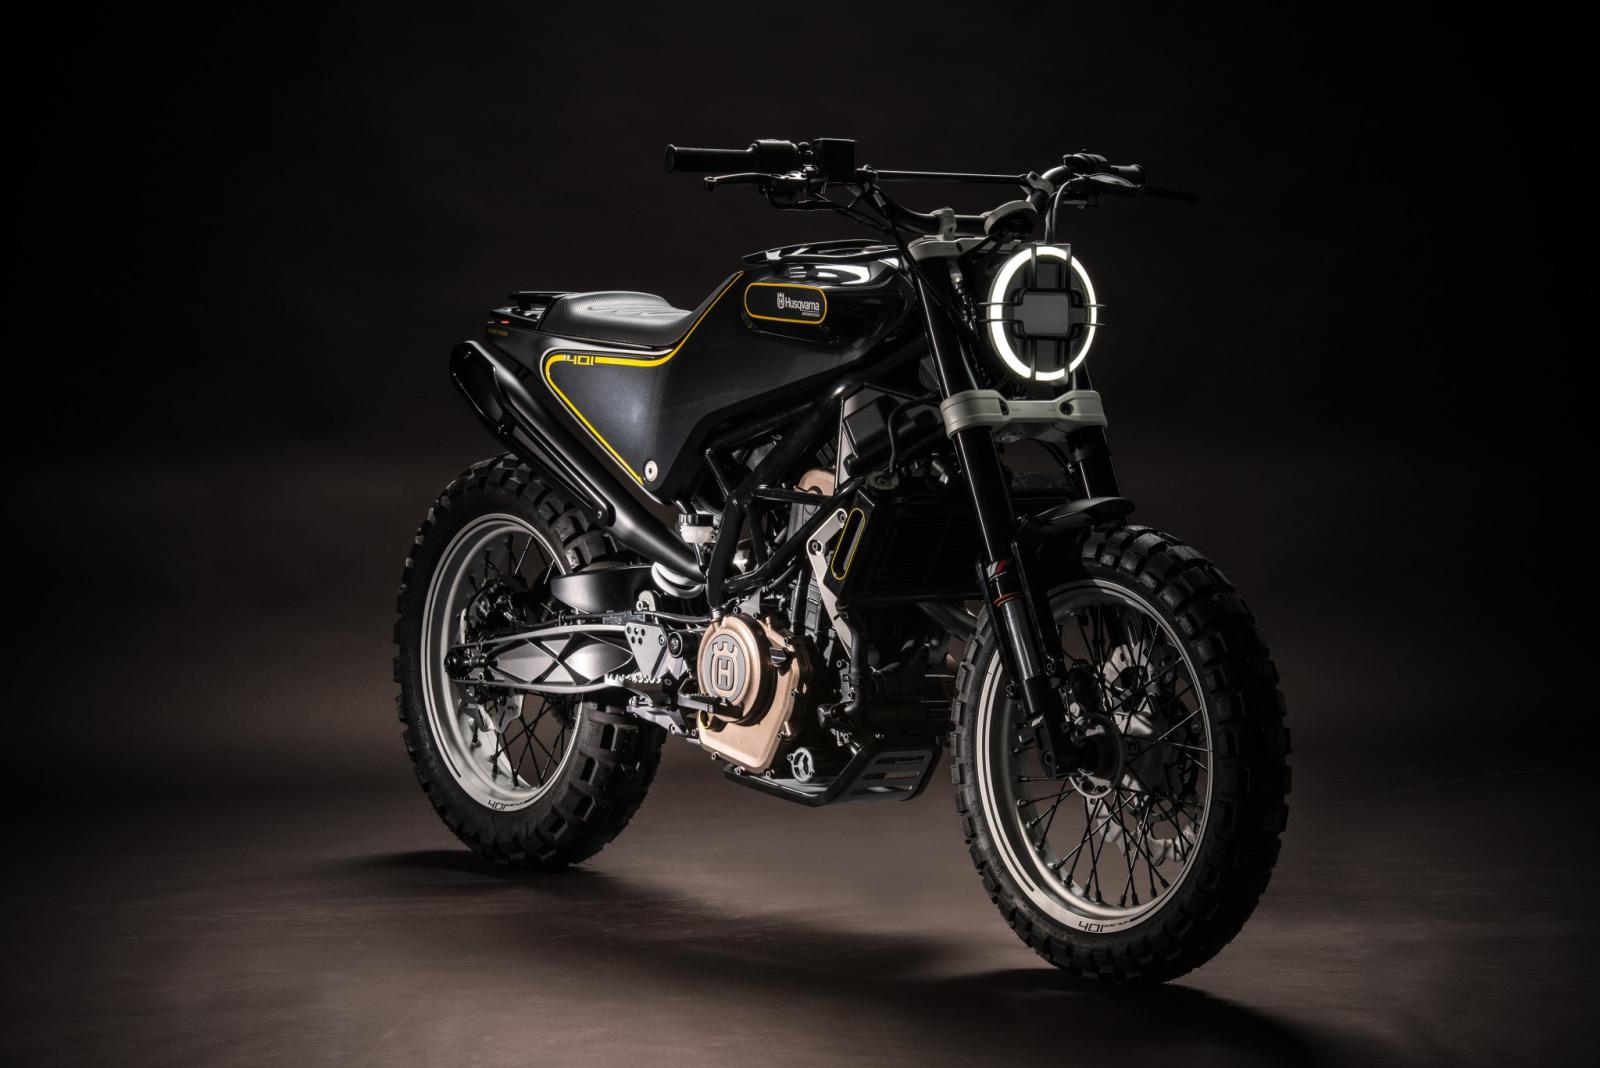 husqvarna-401-vitpilen-and-401-svartpilen-concepts-to-become-production-motorcycles-photo-gallery_12.jpg